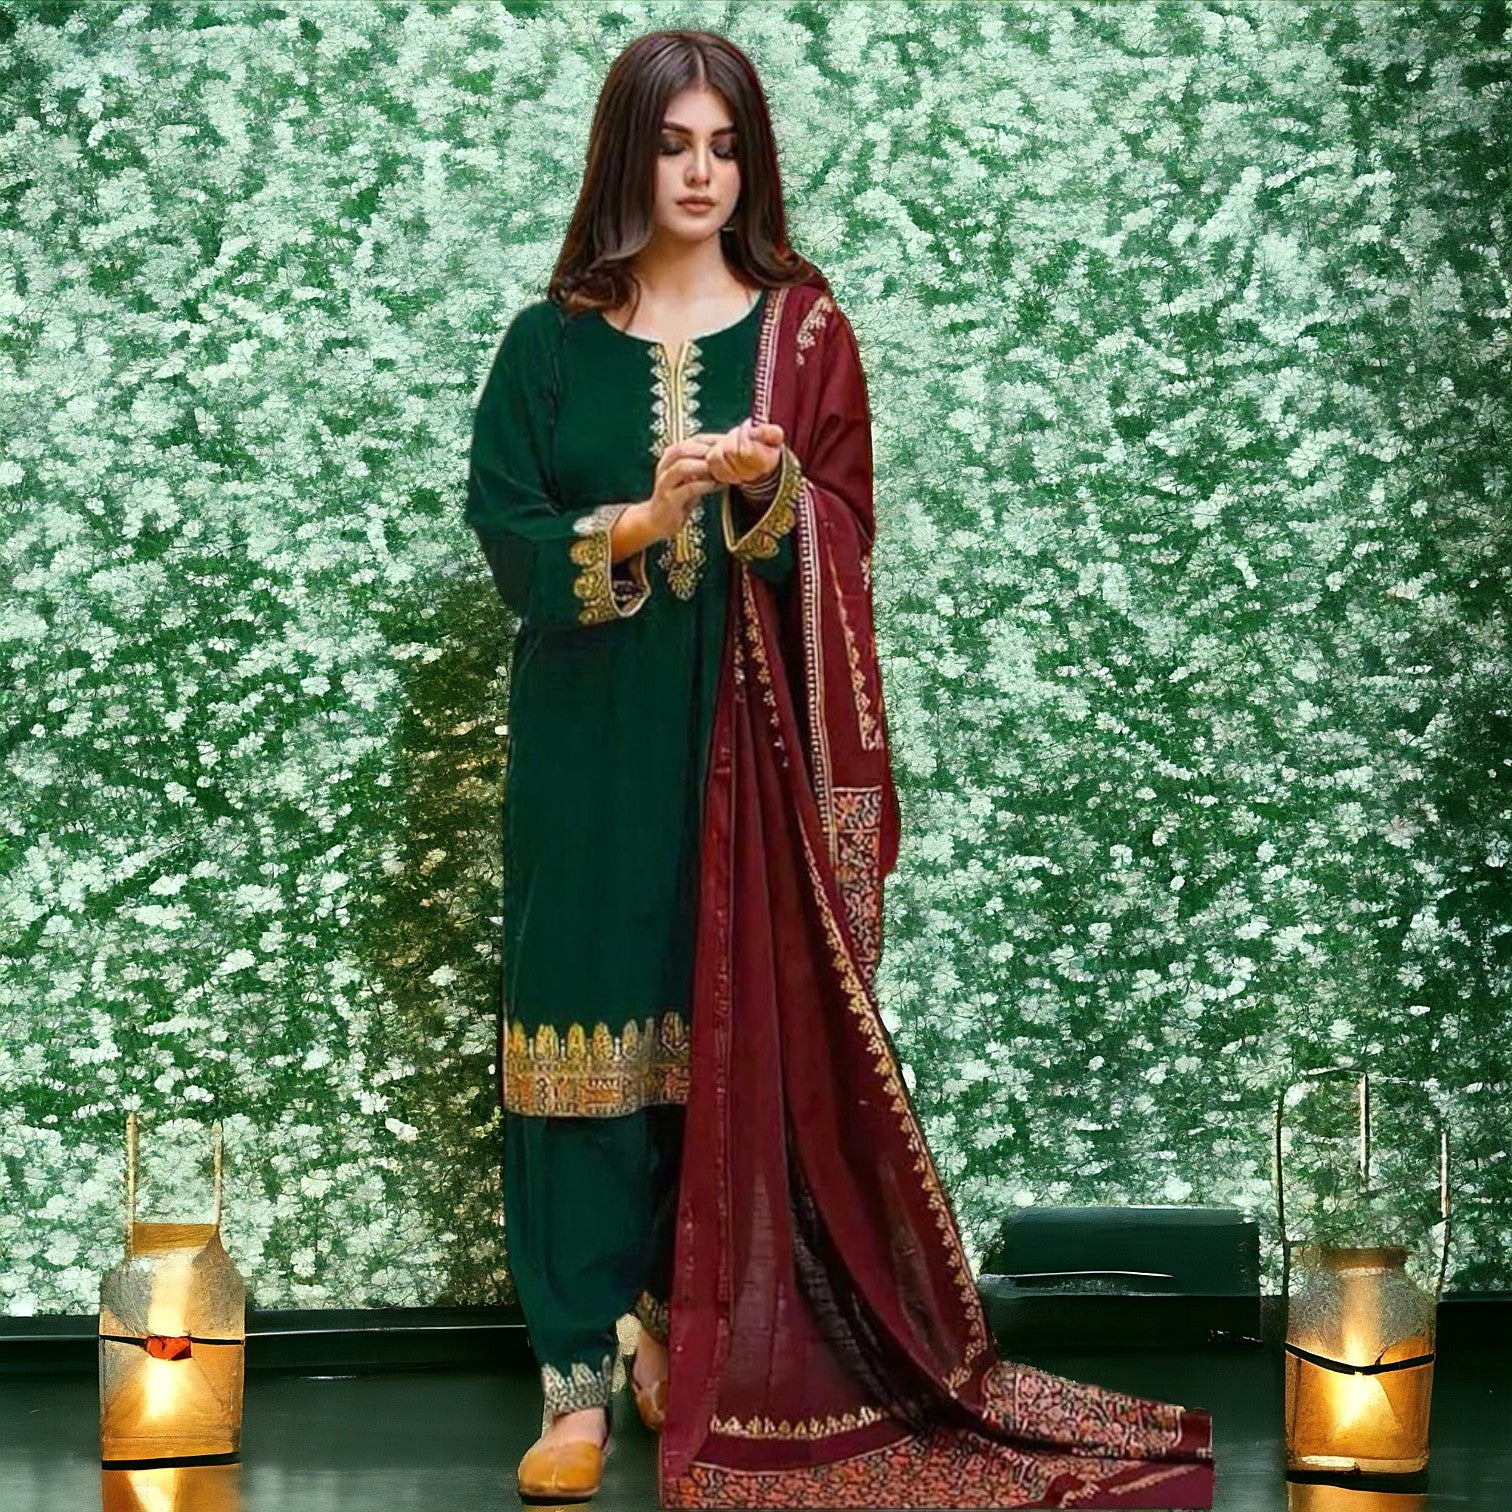 3 Pcs Suit-Fine Quality Lawn  with Embraided chiffon Dupatta